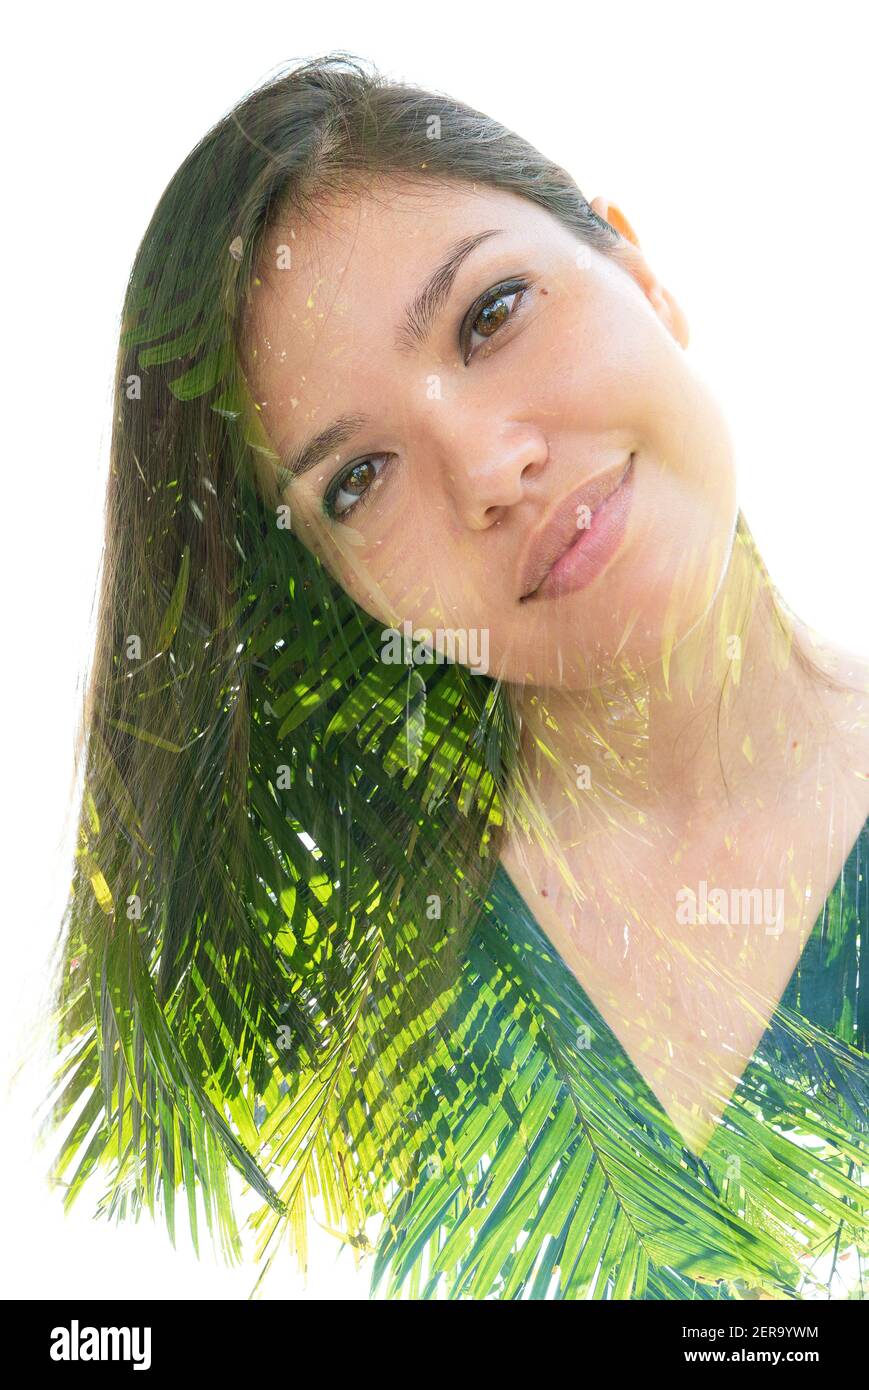 Aestetic portrait of a smiling asian woman Stock Photo